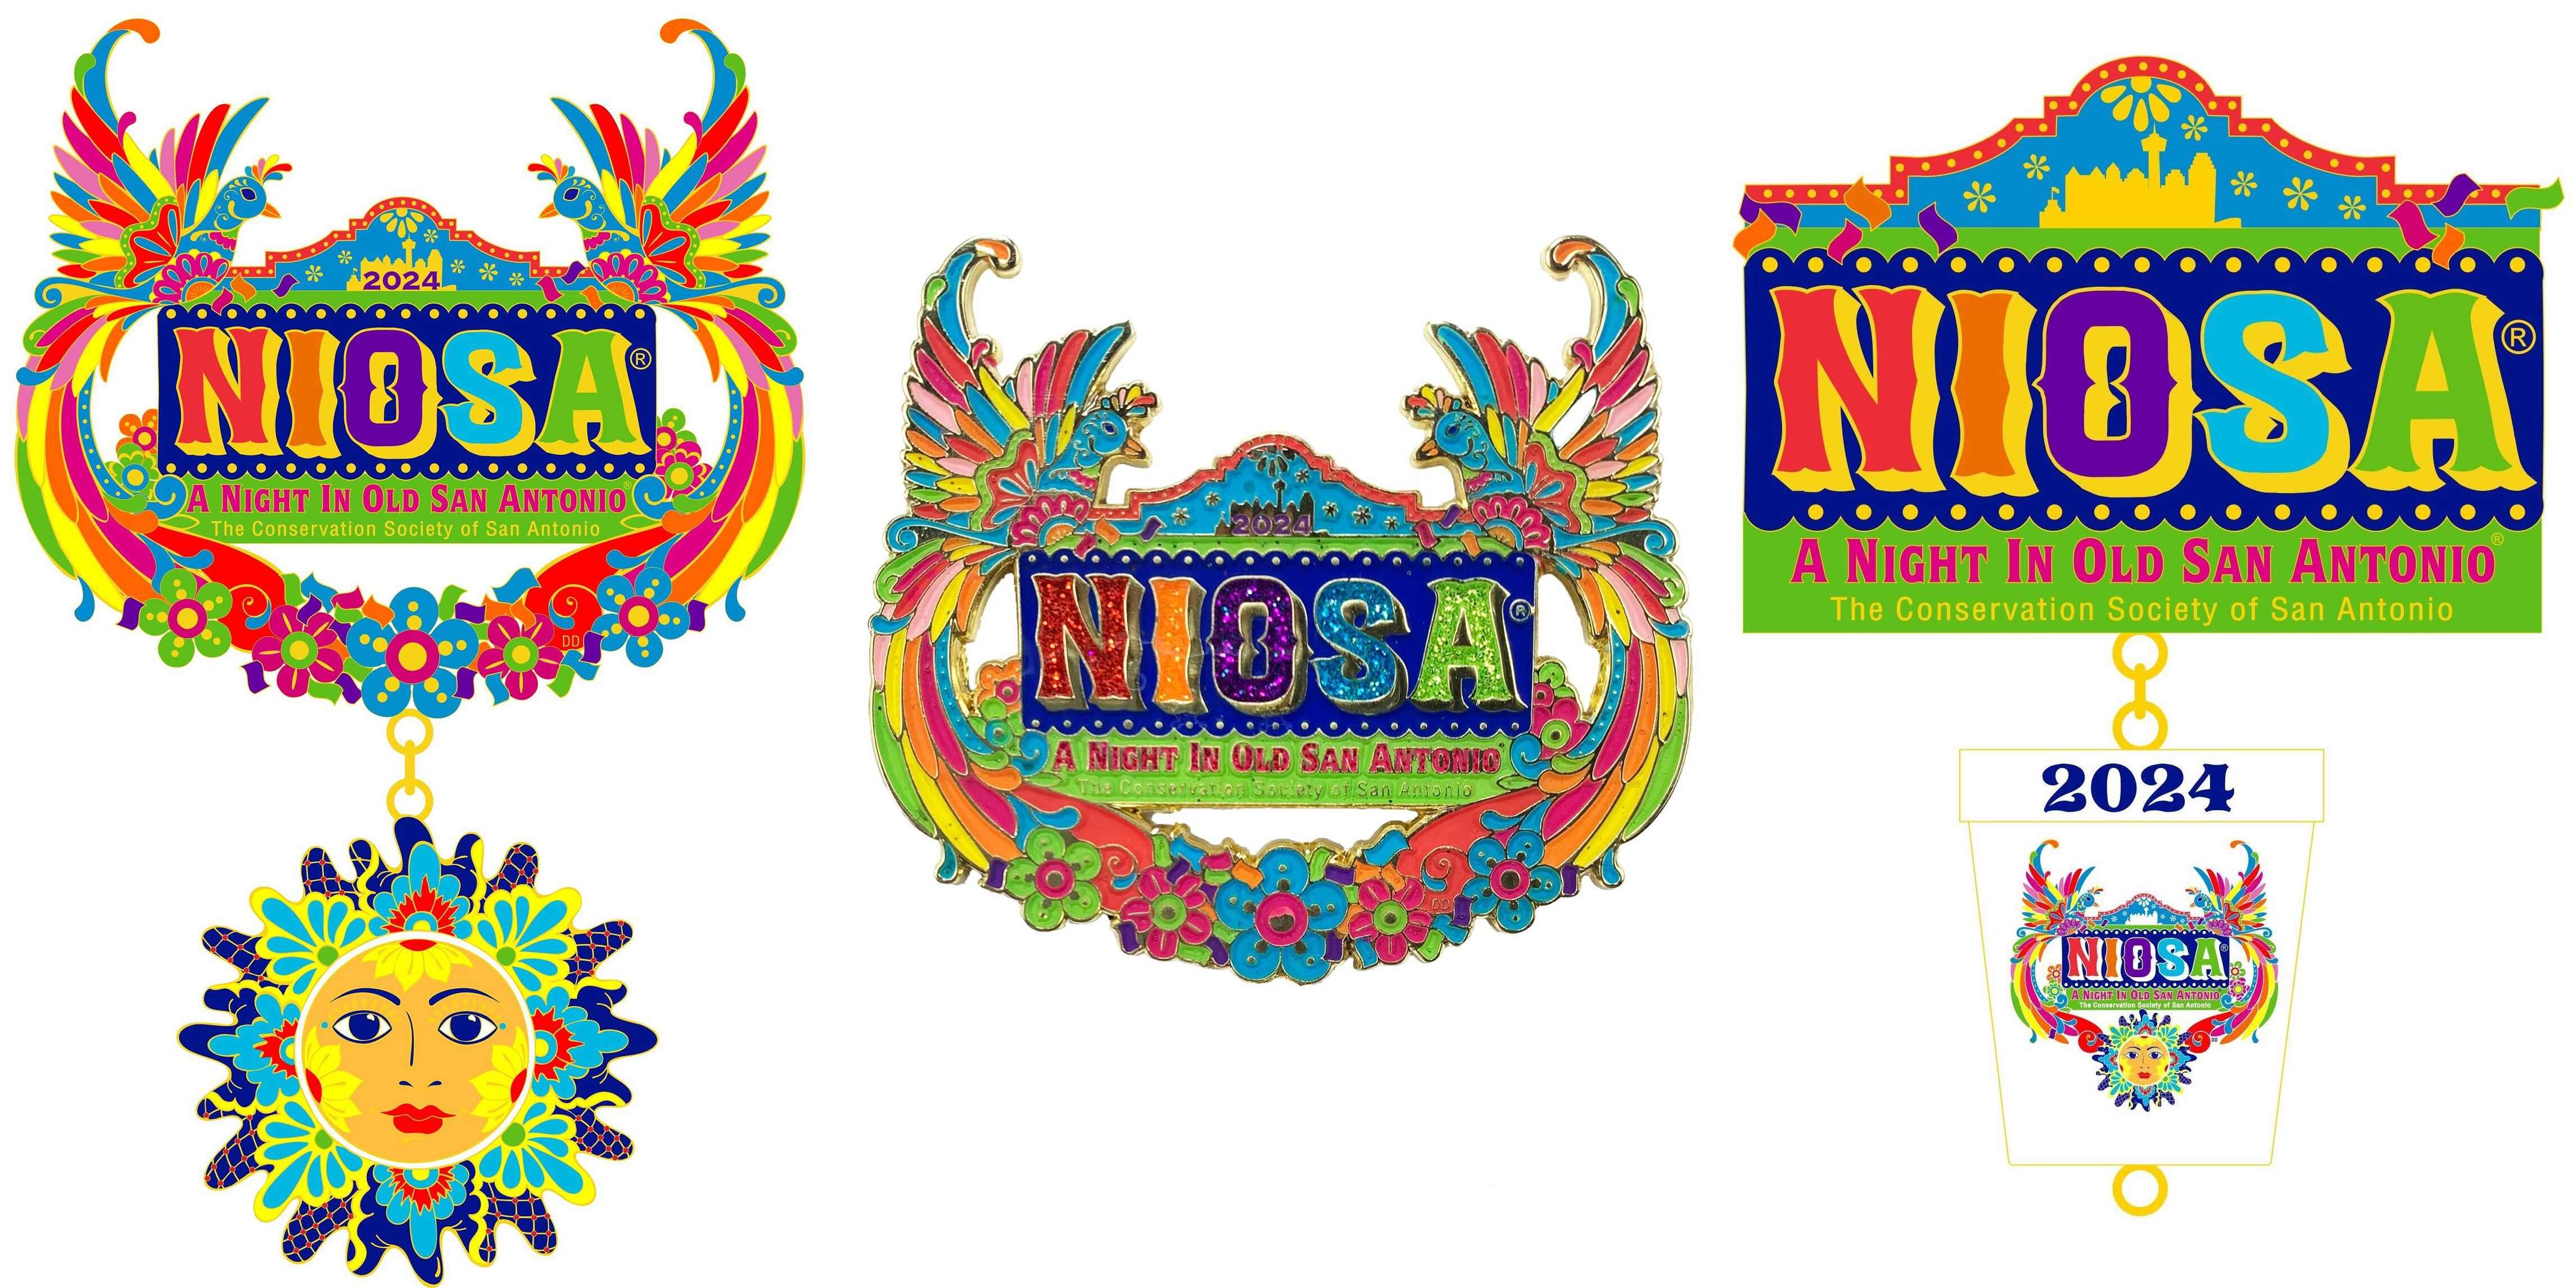 NIOSA is selling two medals and a lapel pin for the 2024 Fiesta season.